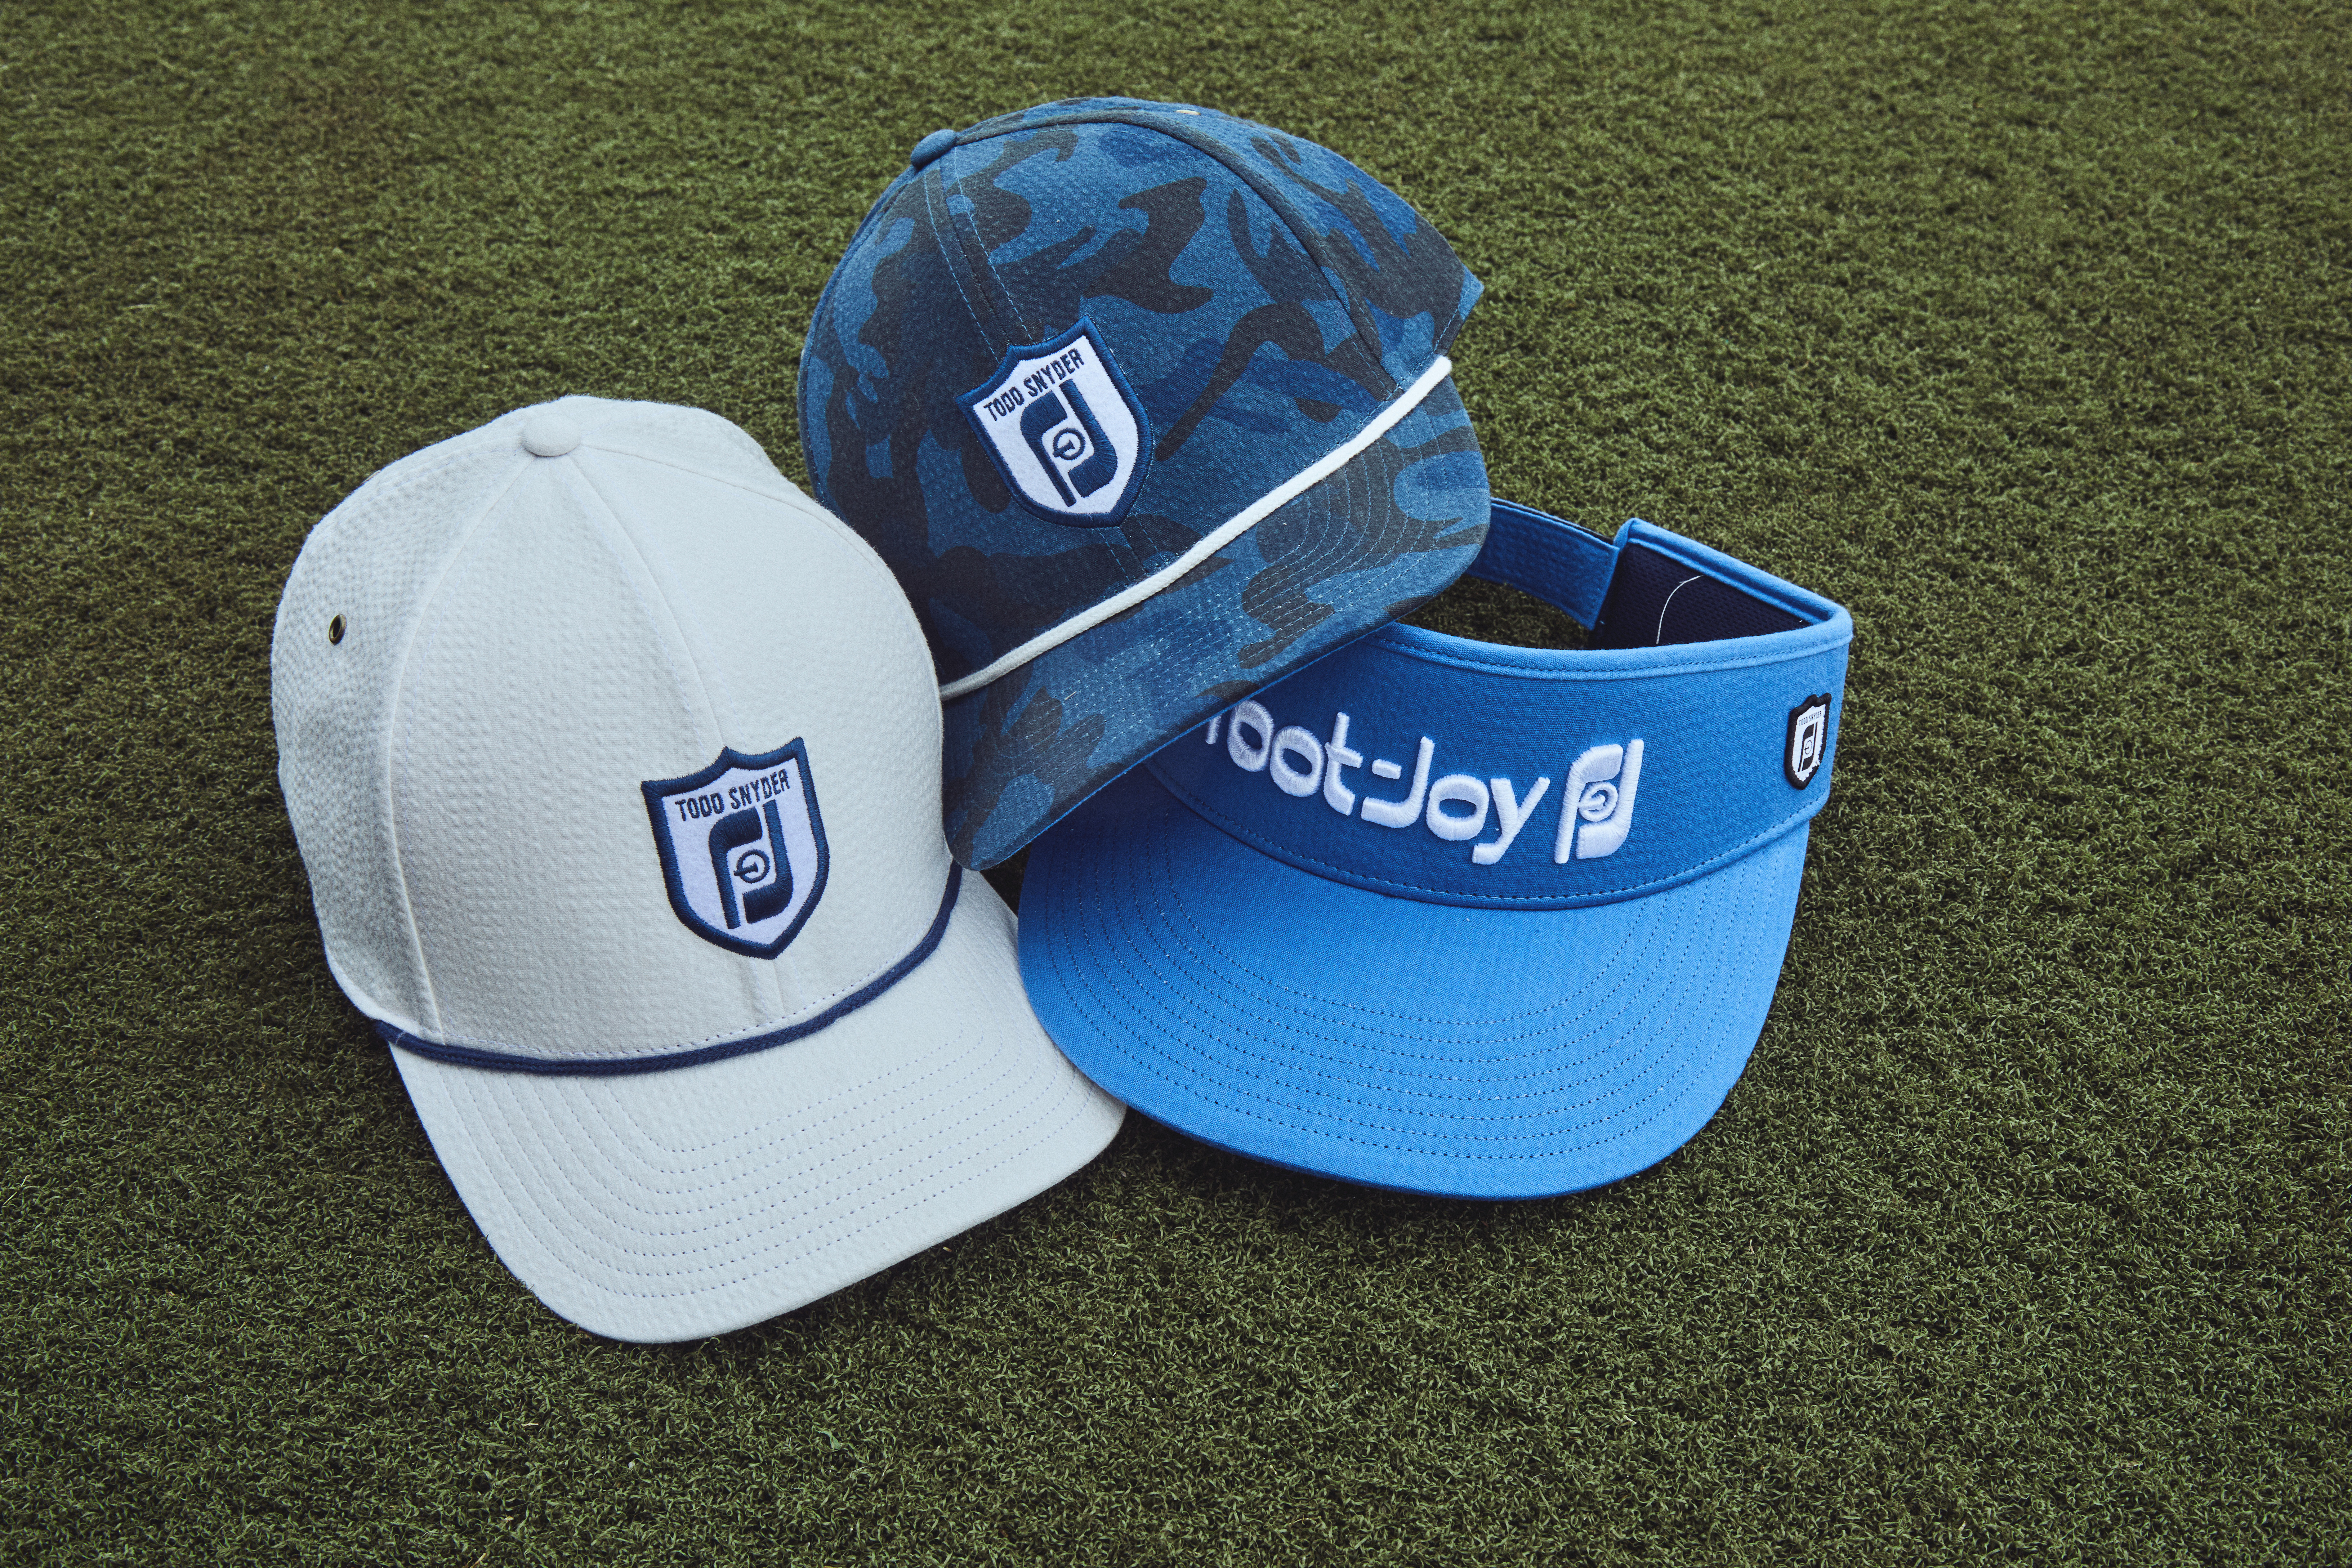 Made from a seersucker-spandex blend, the caps feature the vintage FootJoy “golf and tee” logo